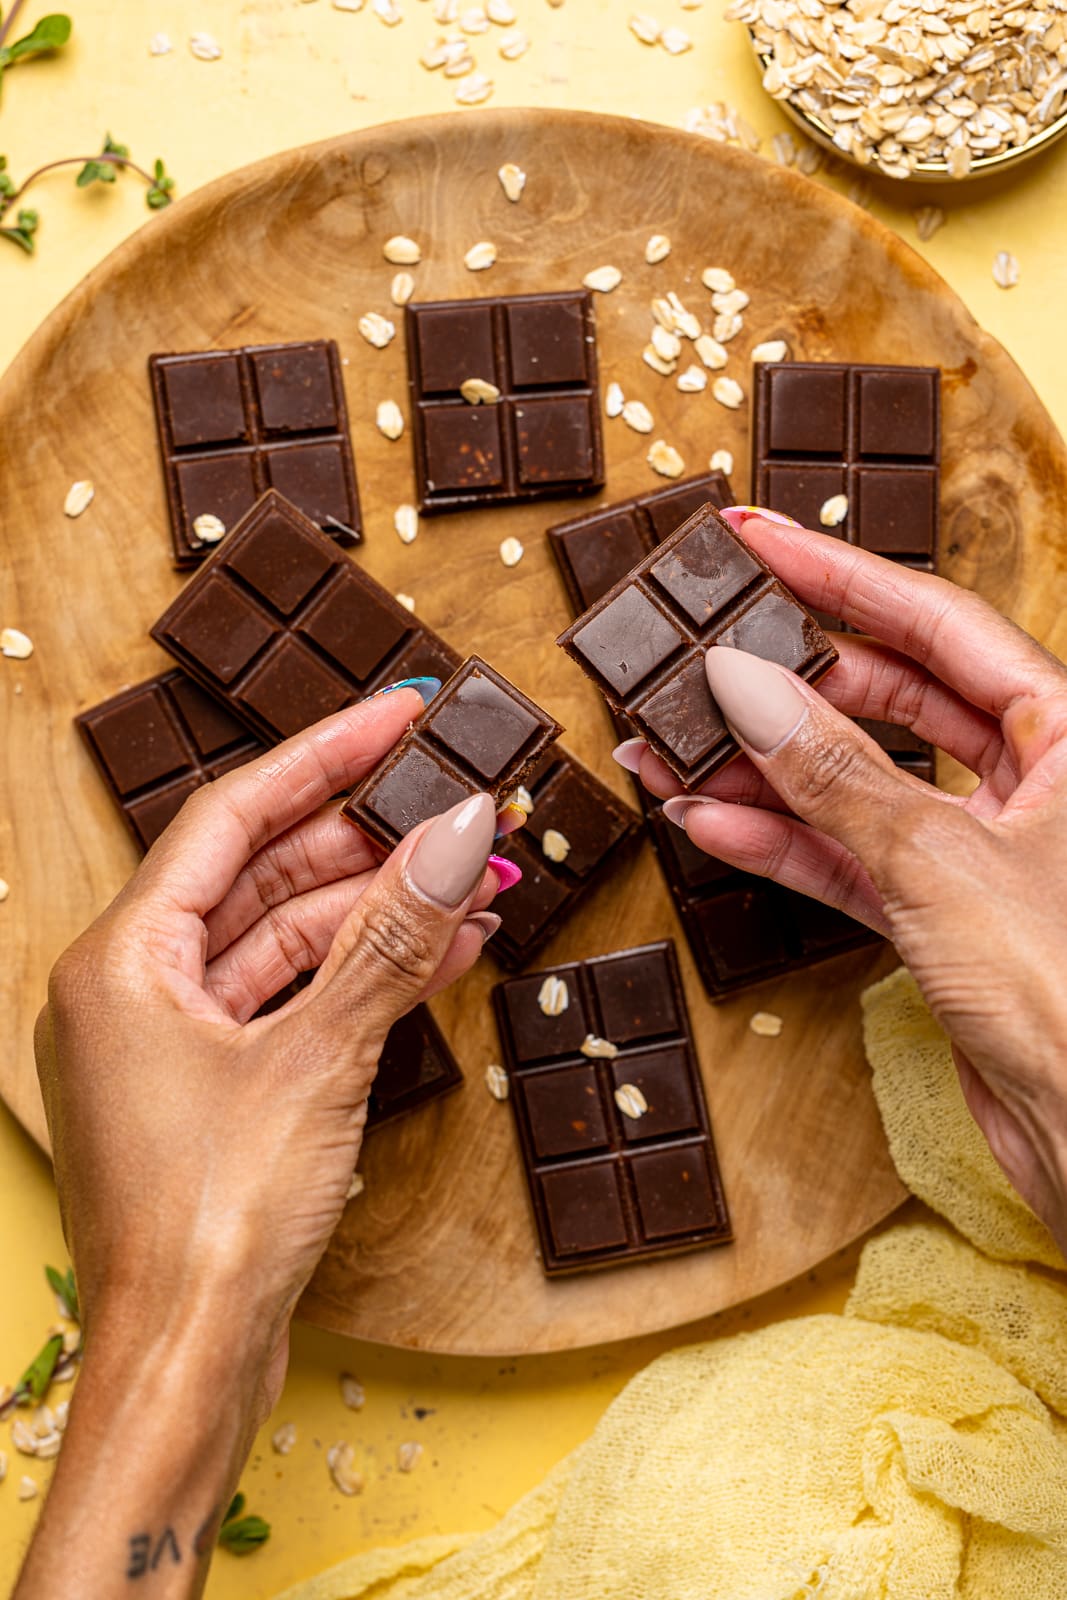 chocolate bars being held in hands with a brown wood plate in the background.